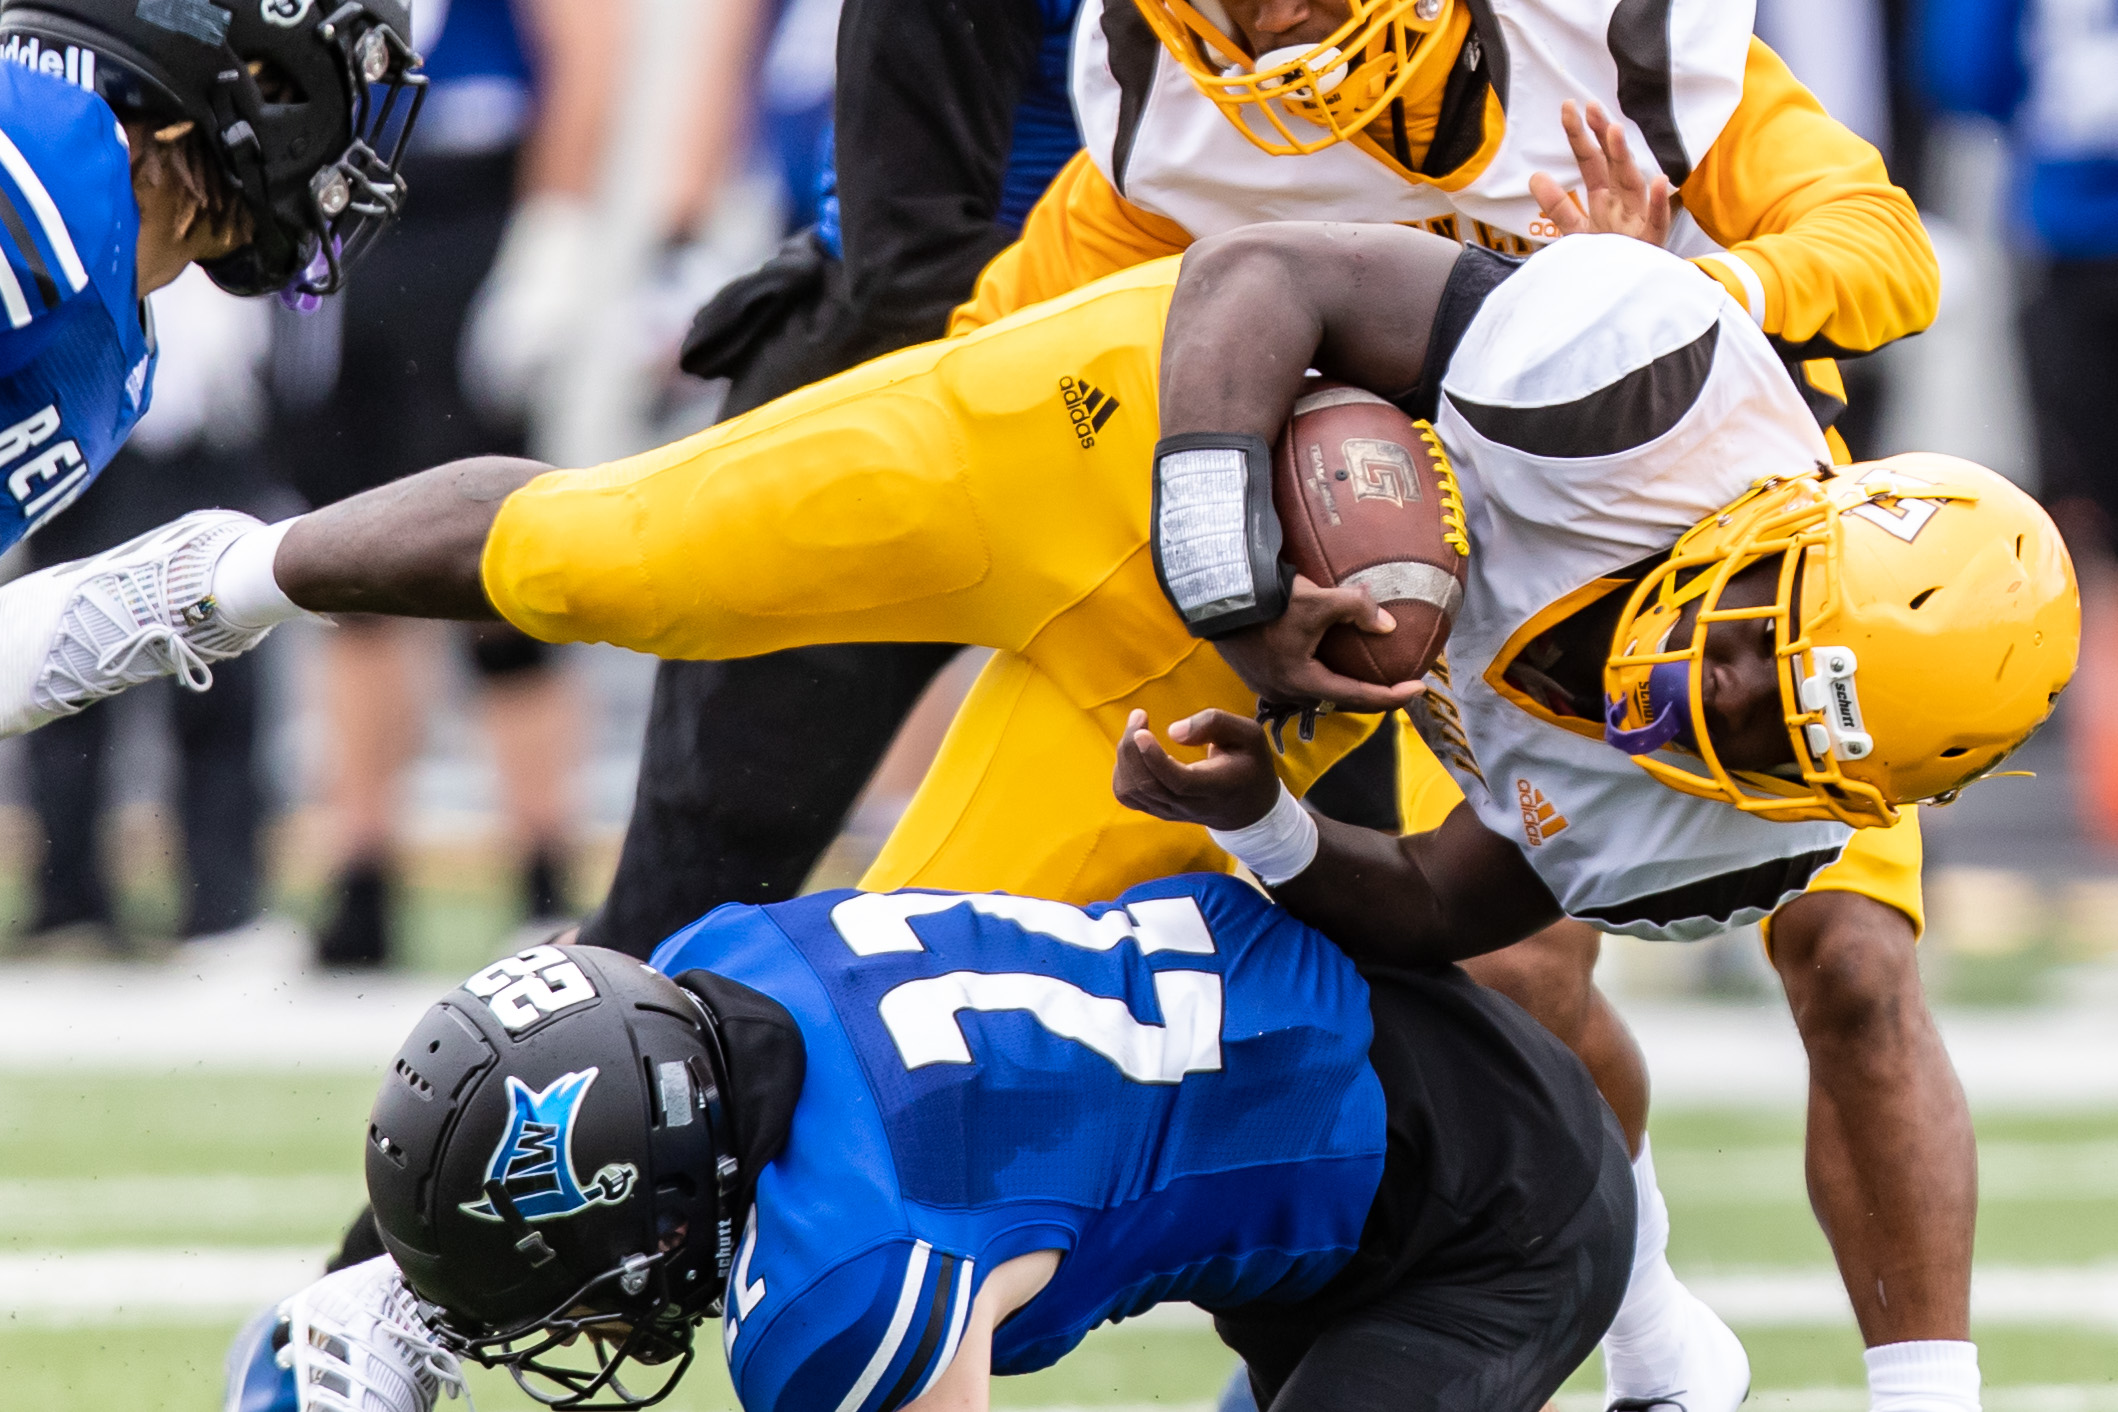 Broncbusters fall at No. 2 Iowa Western; drop to 0-3